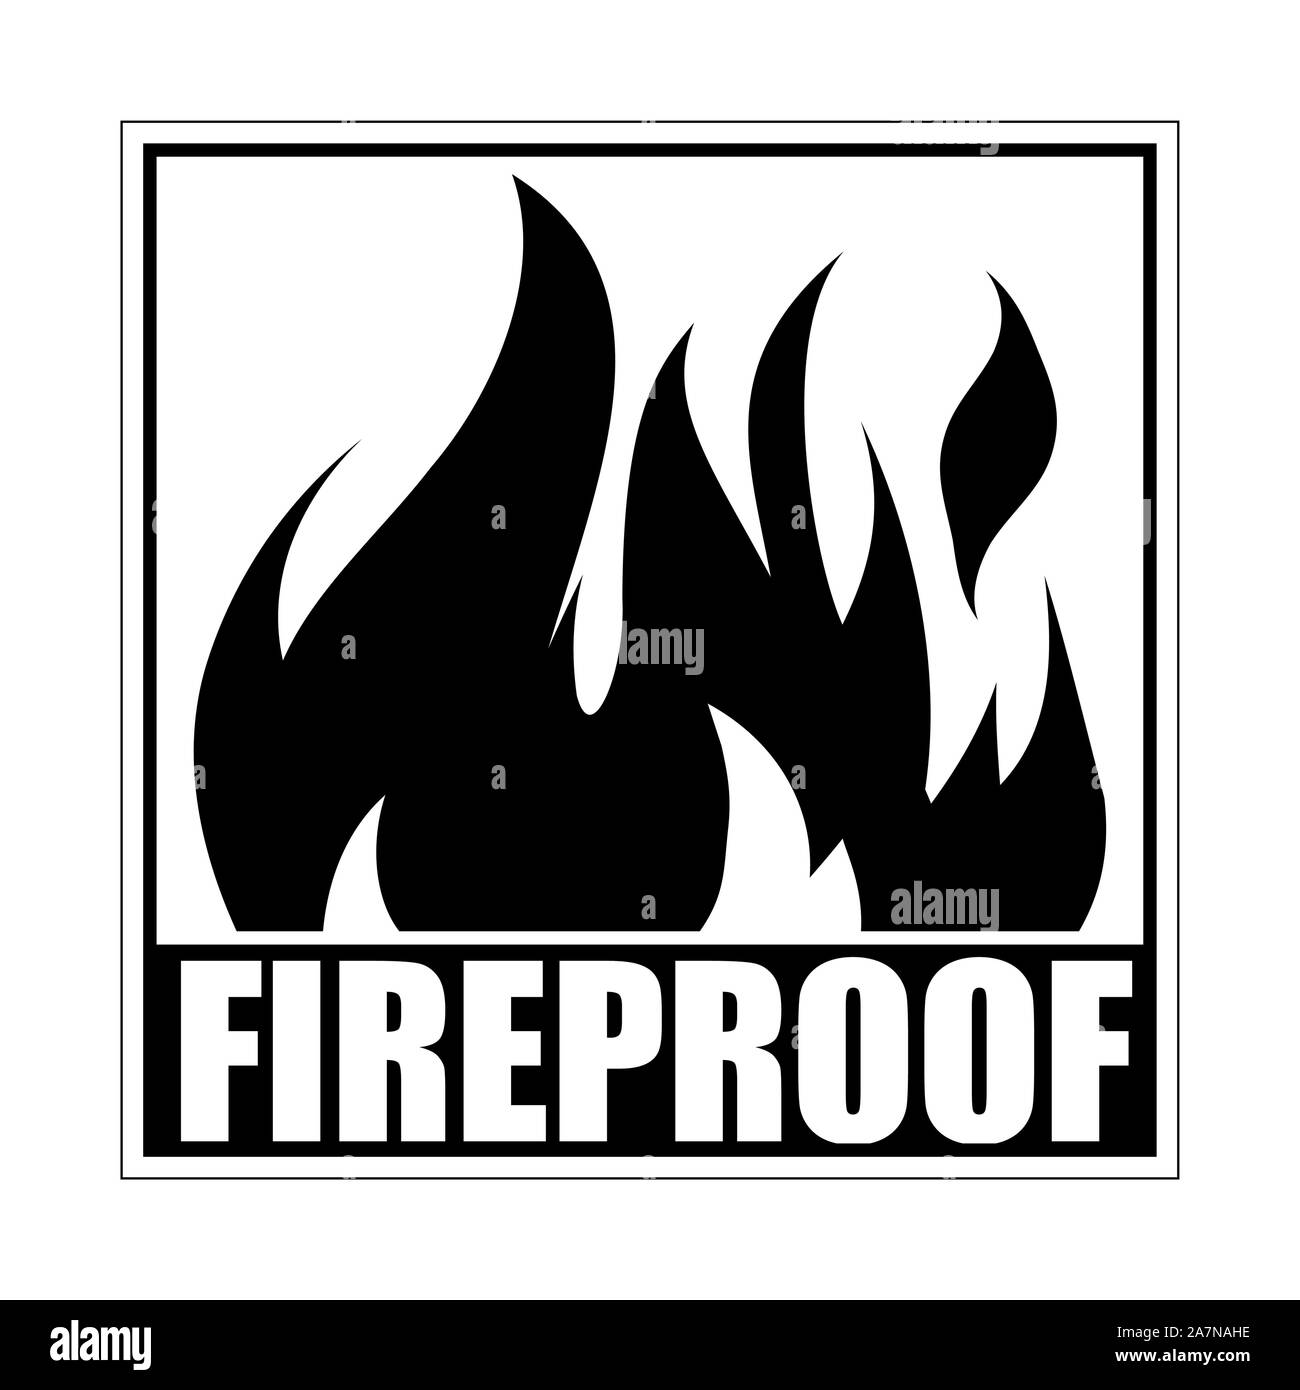 Fireproof square icon, logo design, sign, black label with blazing flame. Stock Vector